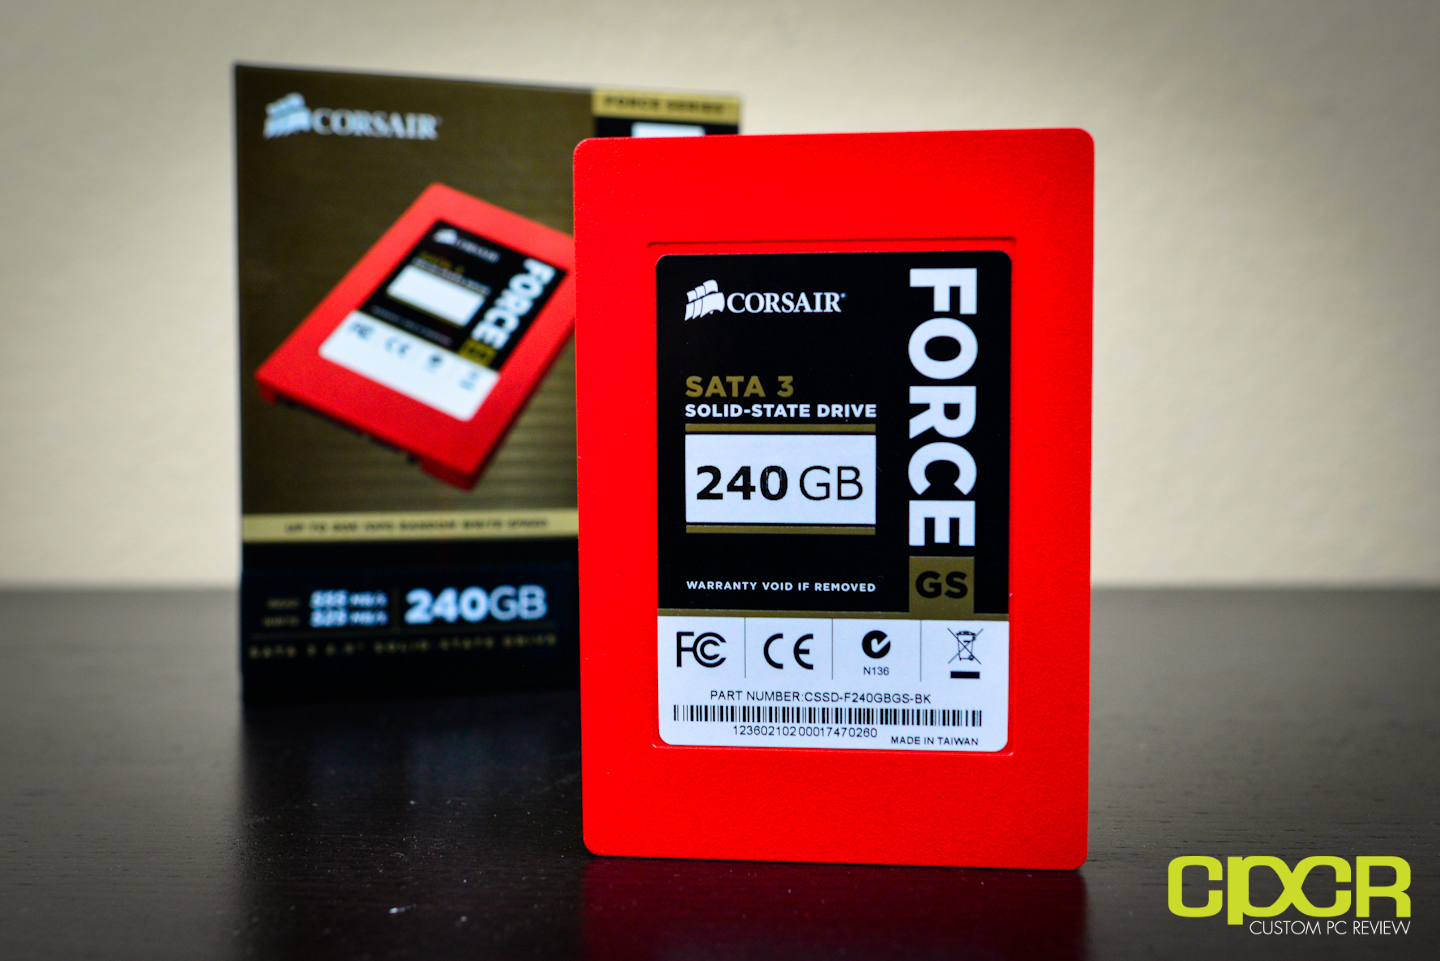 Force Series GS 240GB SSD Review | PC Review